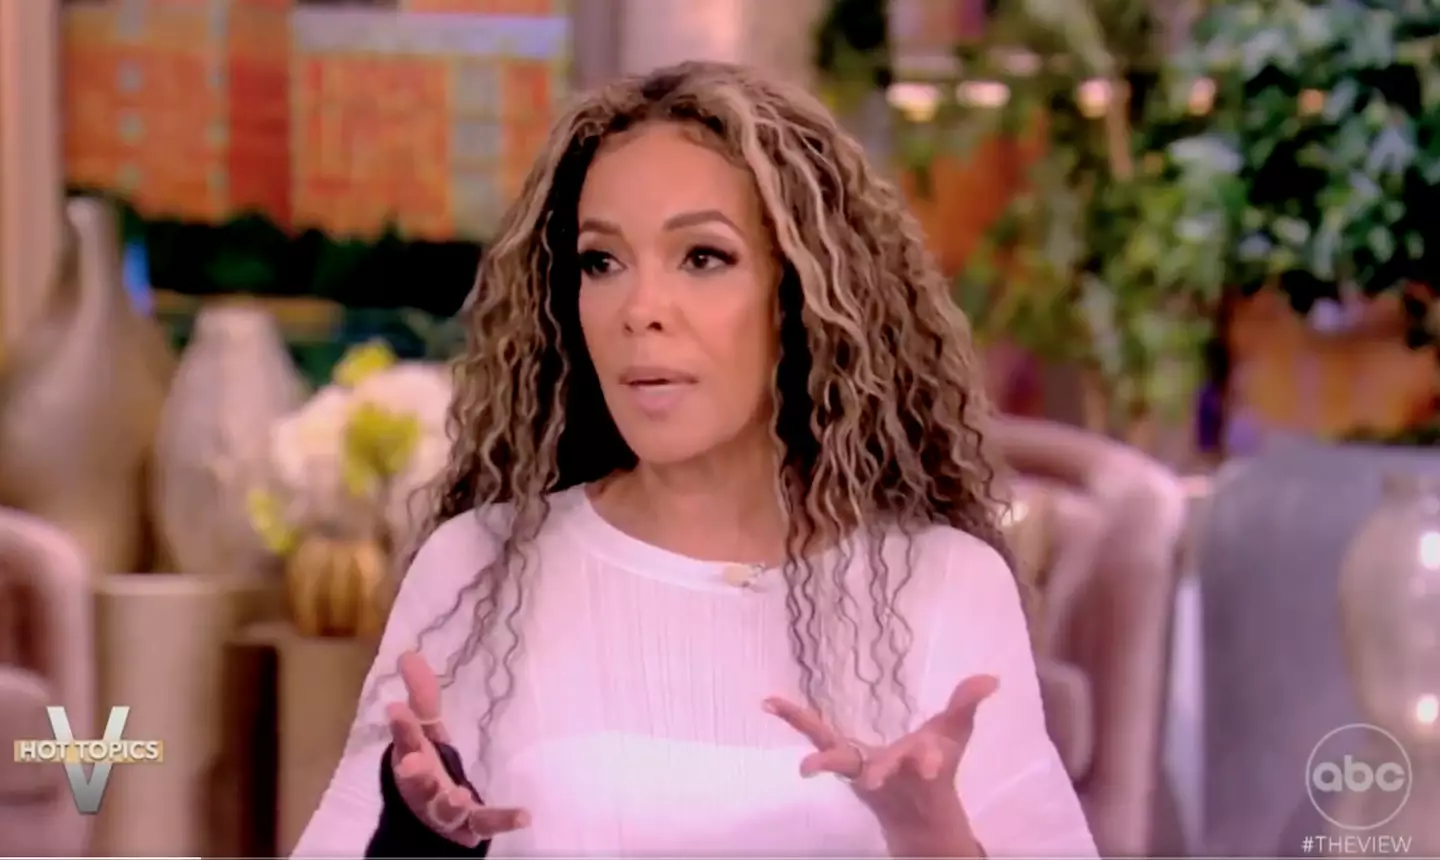 Sunny Hostin on The View. The View via YouTube